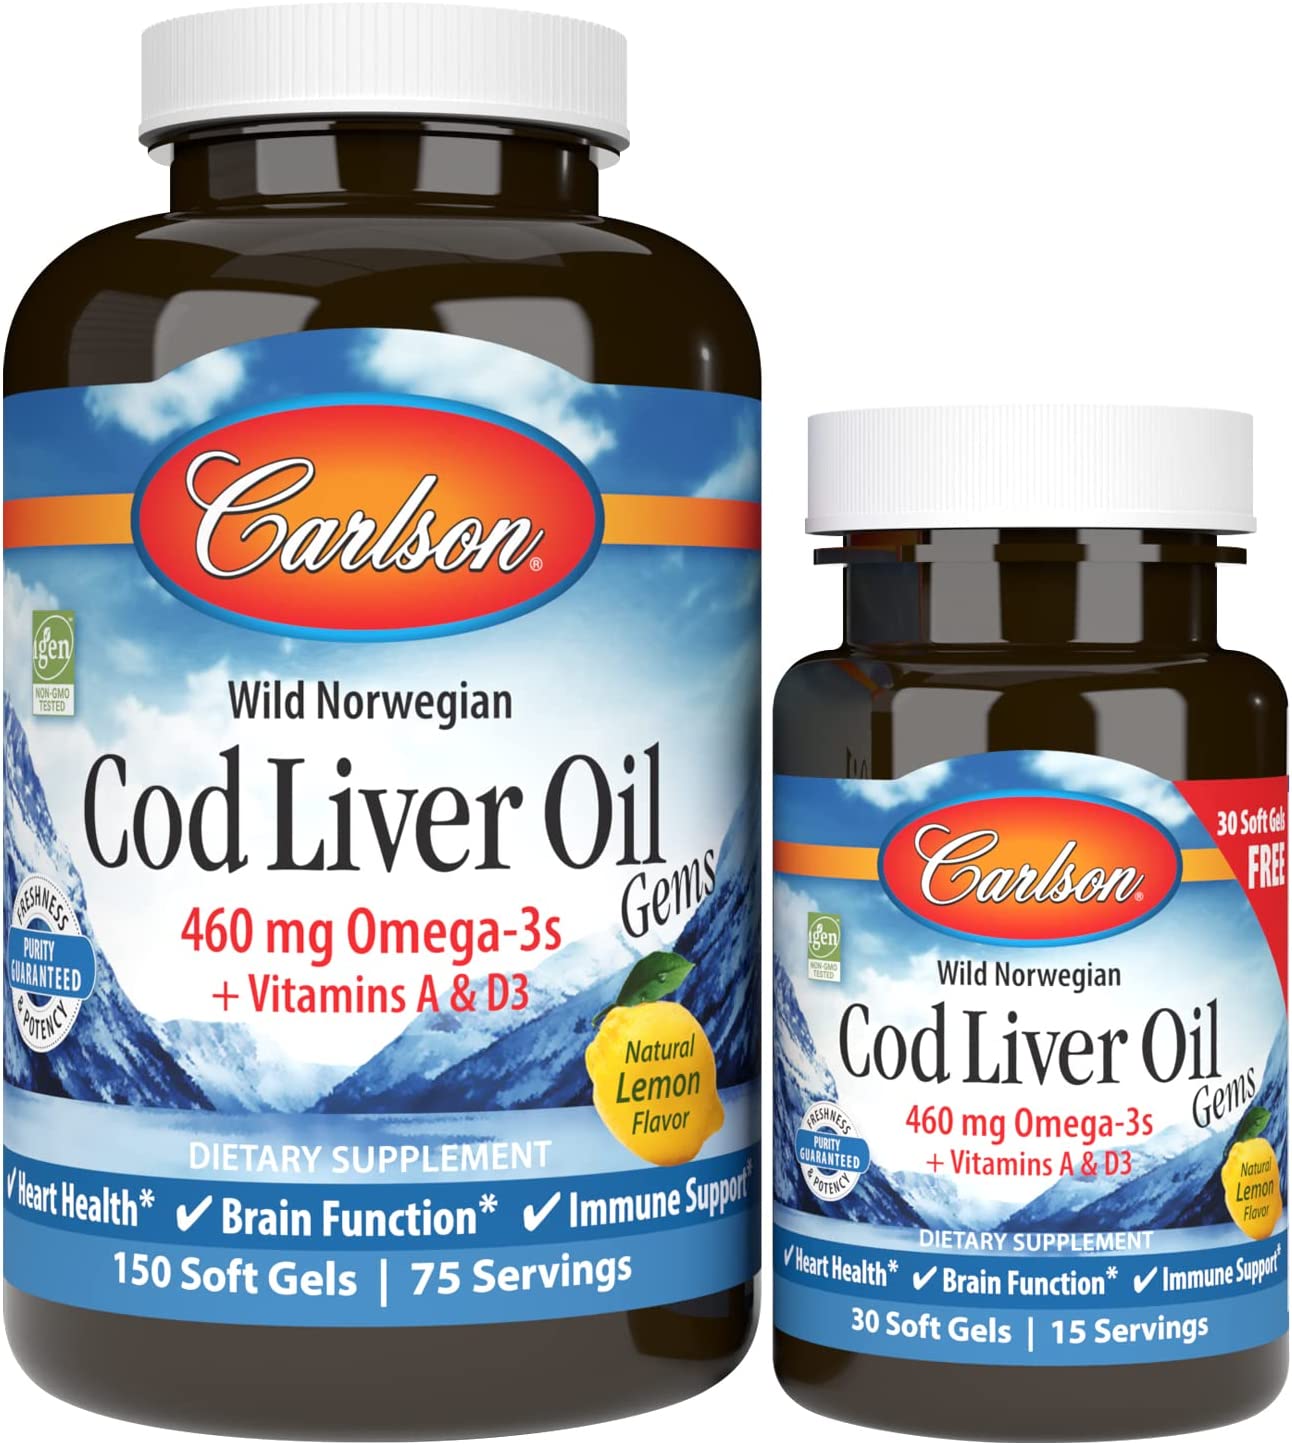 Carlson - Cod Liver Oil Gems, 460 mg Omega-3s + Vitamins A & D3, Wild-Caught Norwegian Arctic Cod Liver Oil, Sustainably Sourced Nordic Fish Oil Capsules, Lemon, 150+30 Softgels  ( Size: 180 Count (Pack of 1) )